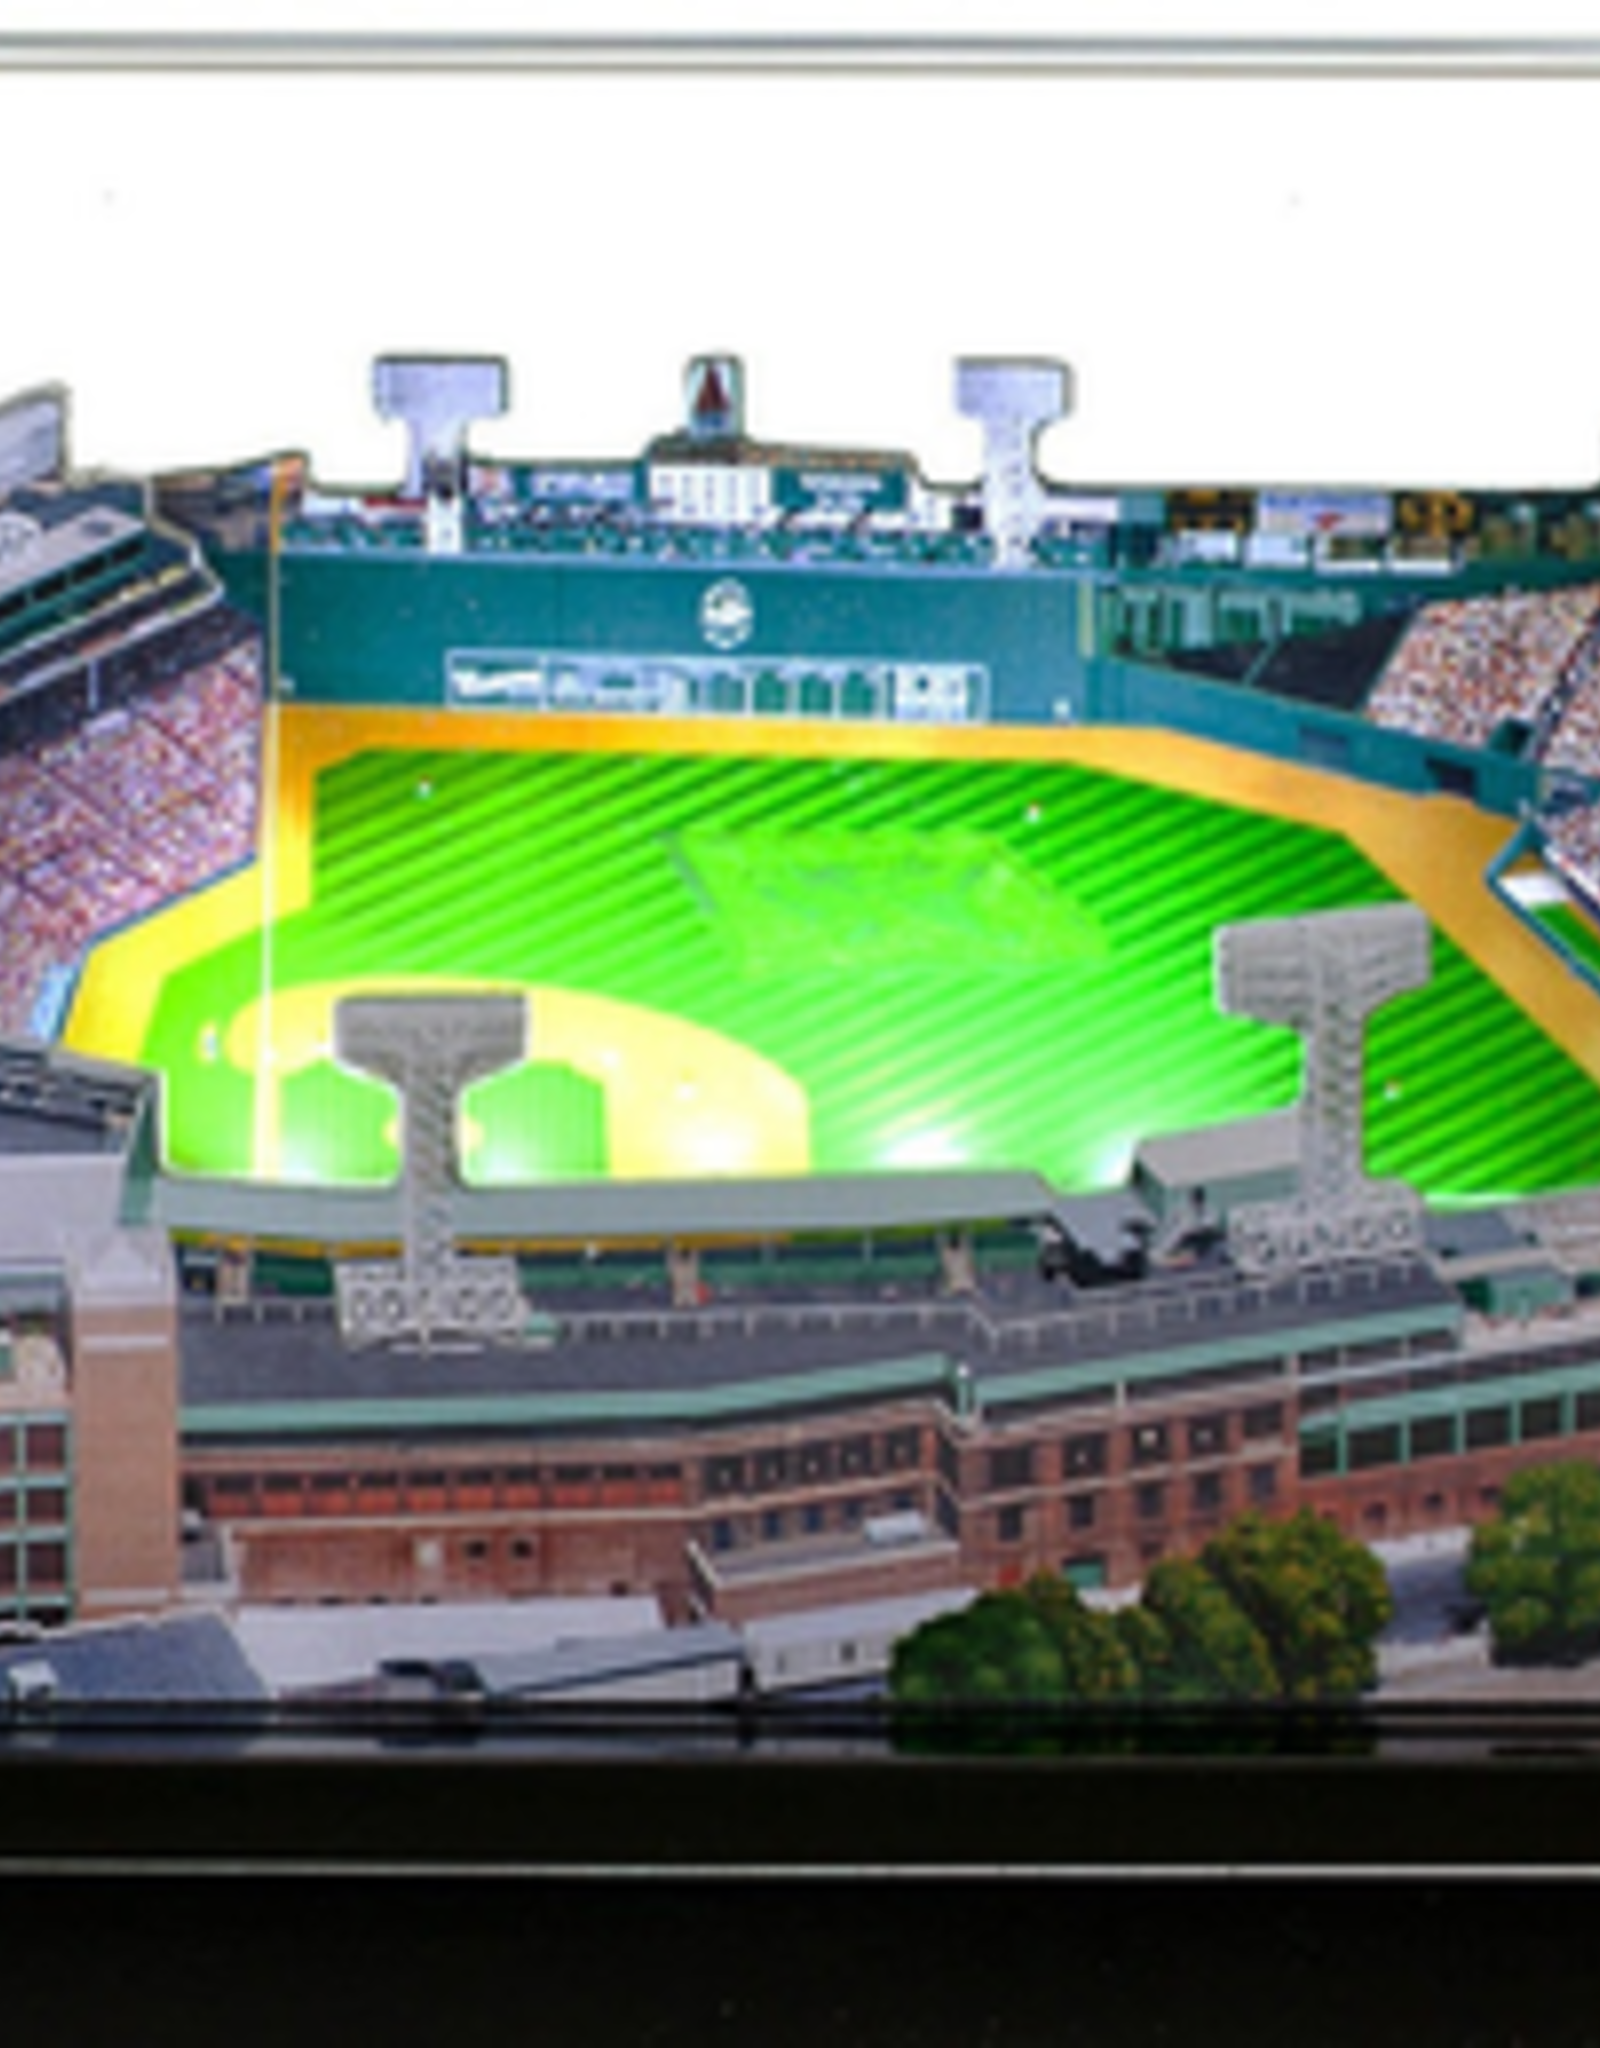 HOMEFIELDS Red Sox HomeField - Fenway Park 13IN